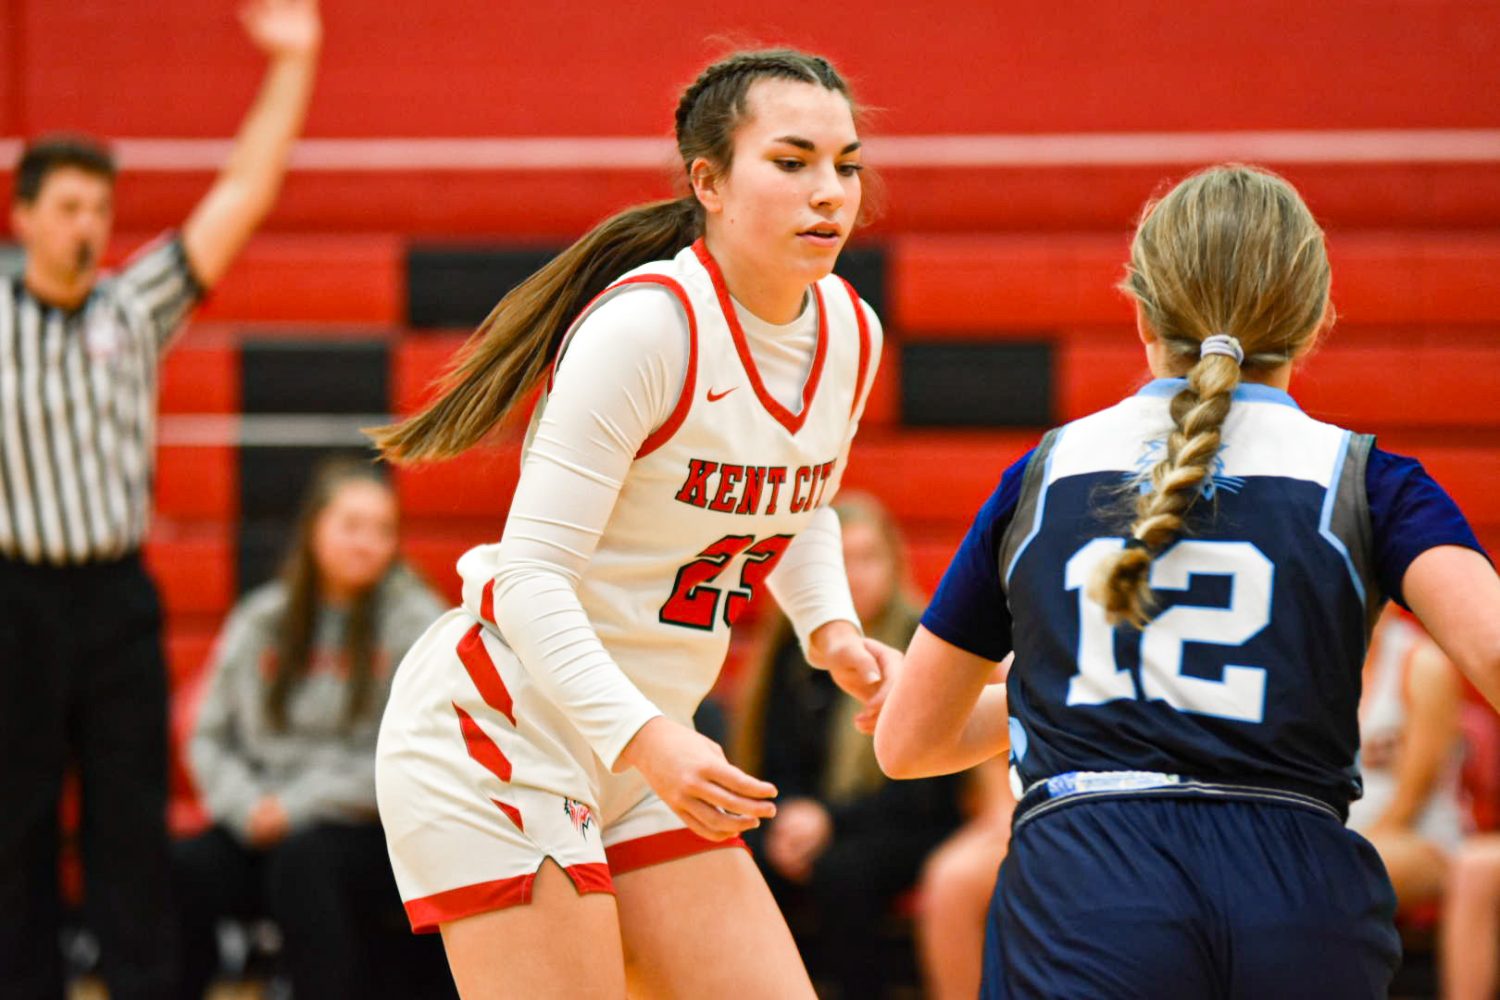 Kent City girls cruise past Brethren in Saturday hoops action